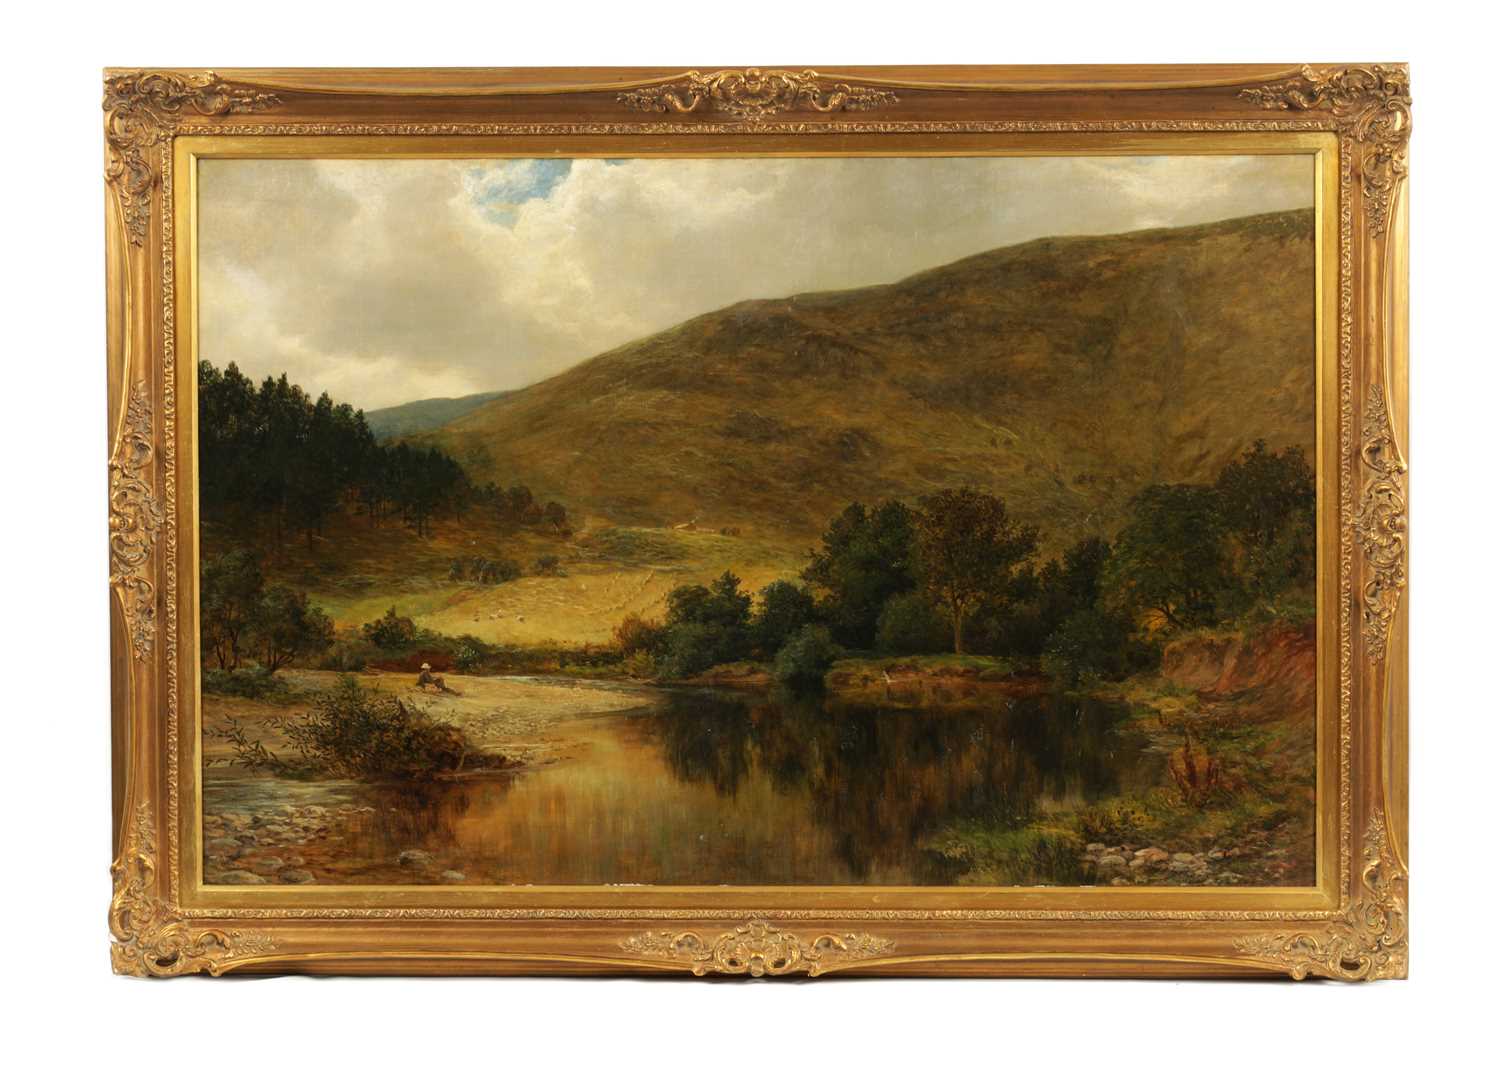 Lot 462 - JAMES DOCHARTY (SCOTTISH 1829 - 1878) A LARGE 19TH CENTURY OIL ON CANVAS